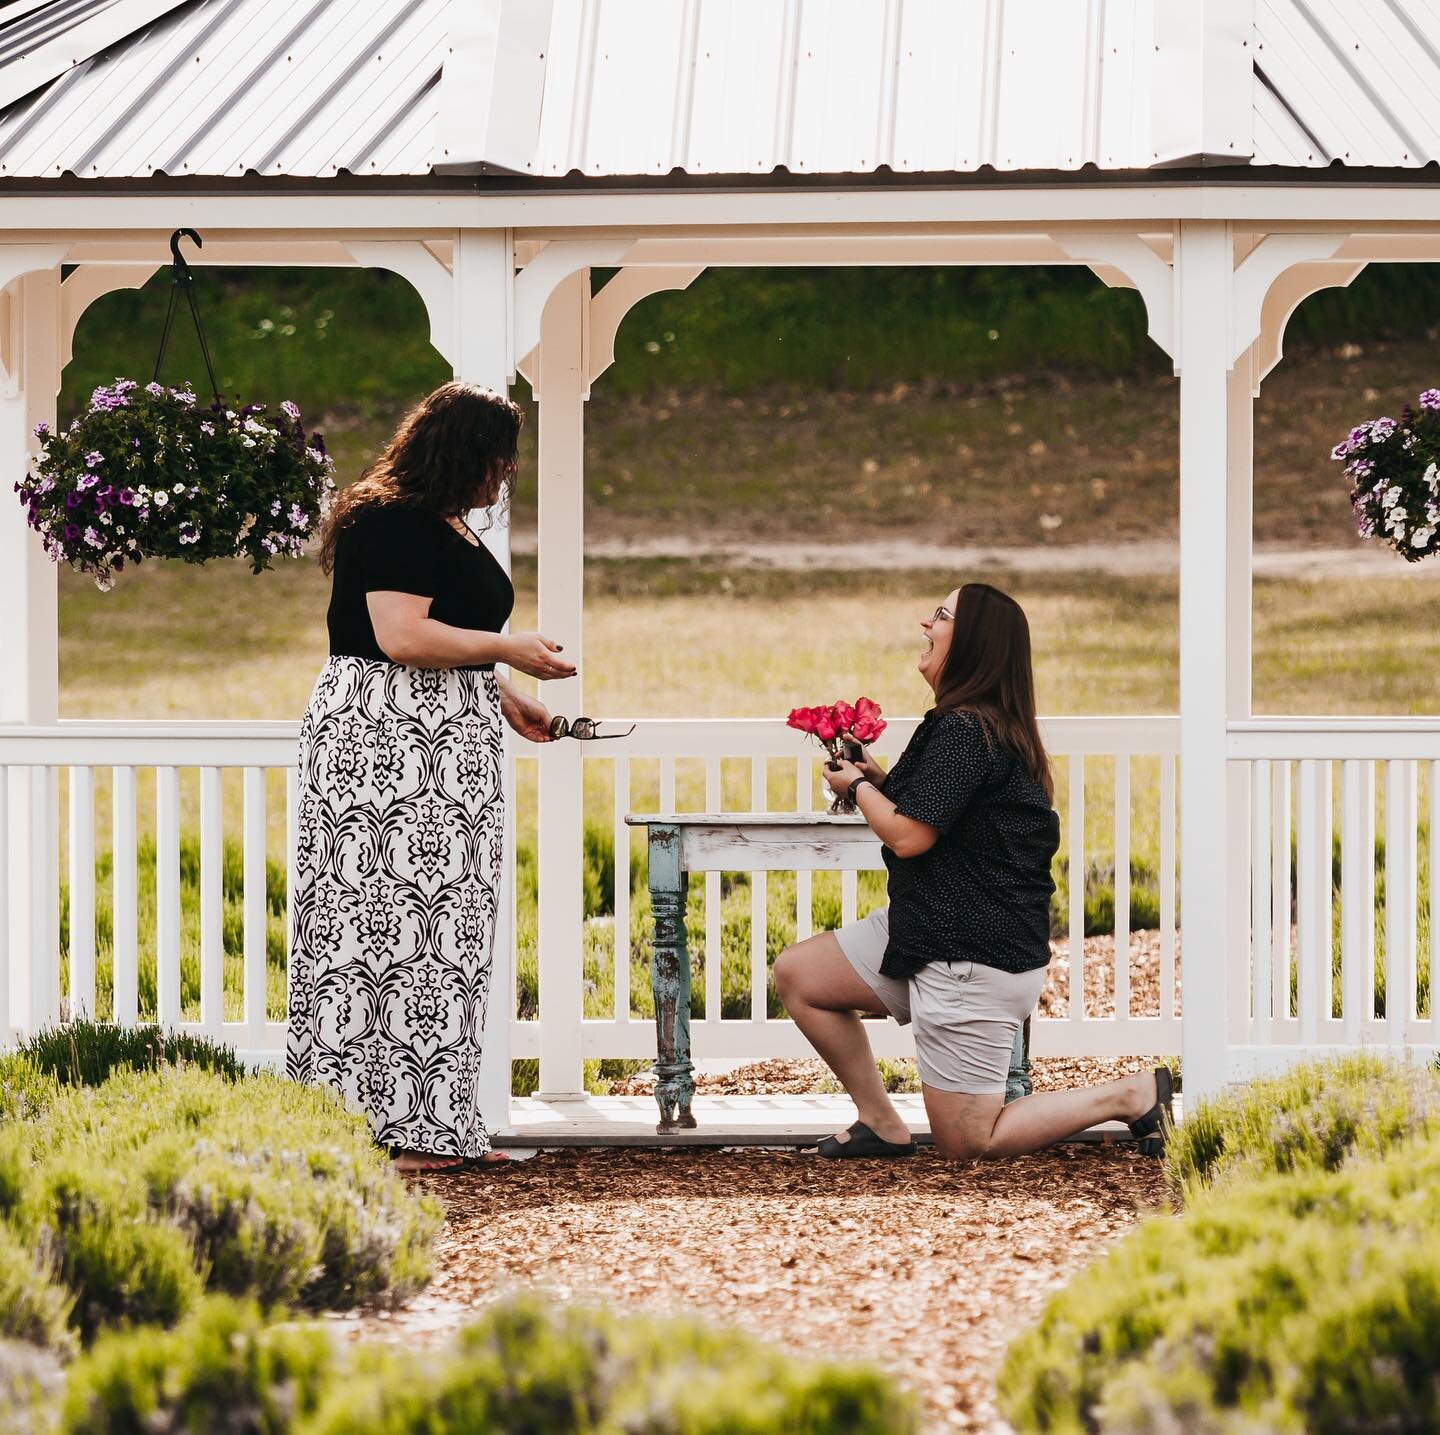 Okay but why was I so nervous when I was not the one proposing?! It was so fun and exciting to shoot my first proposal! Cheers to Staci and Erin!
.
.
.
.
.
.
.
#proposal #westmichiganphotographer #westmichiganphotography  #lgbt #loveislove #engaged #